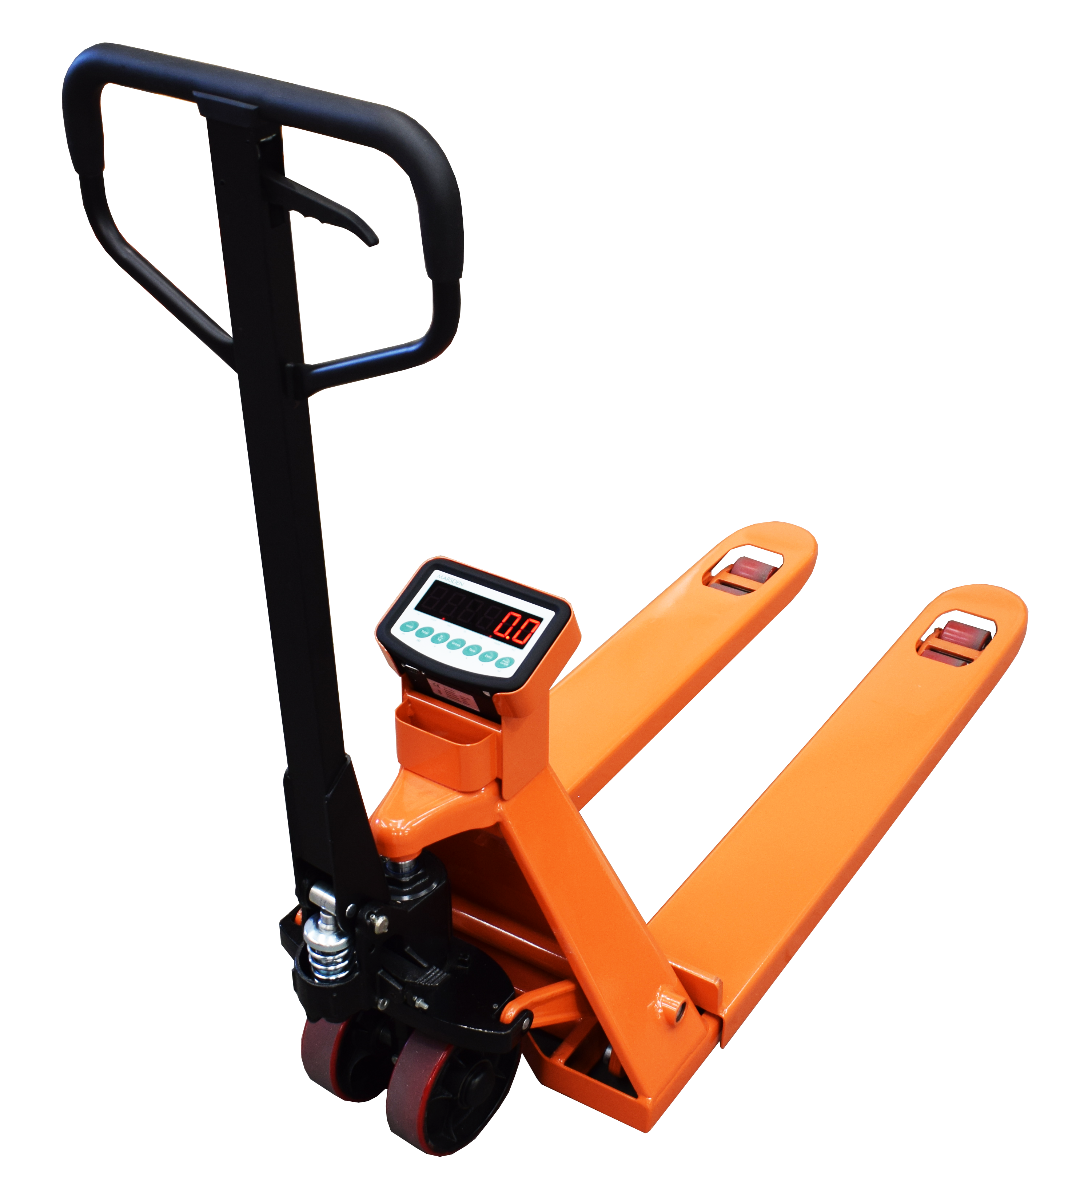 MDPT-500 Heavy Duty Pallet Truck with Built-in Scale